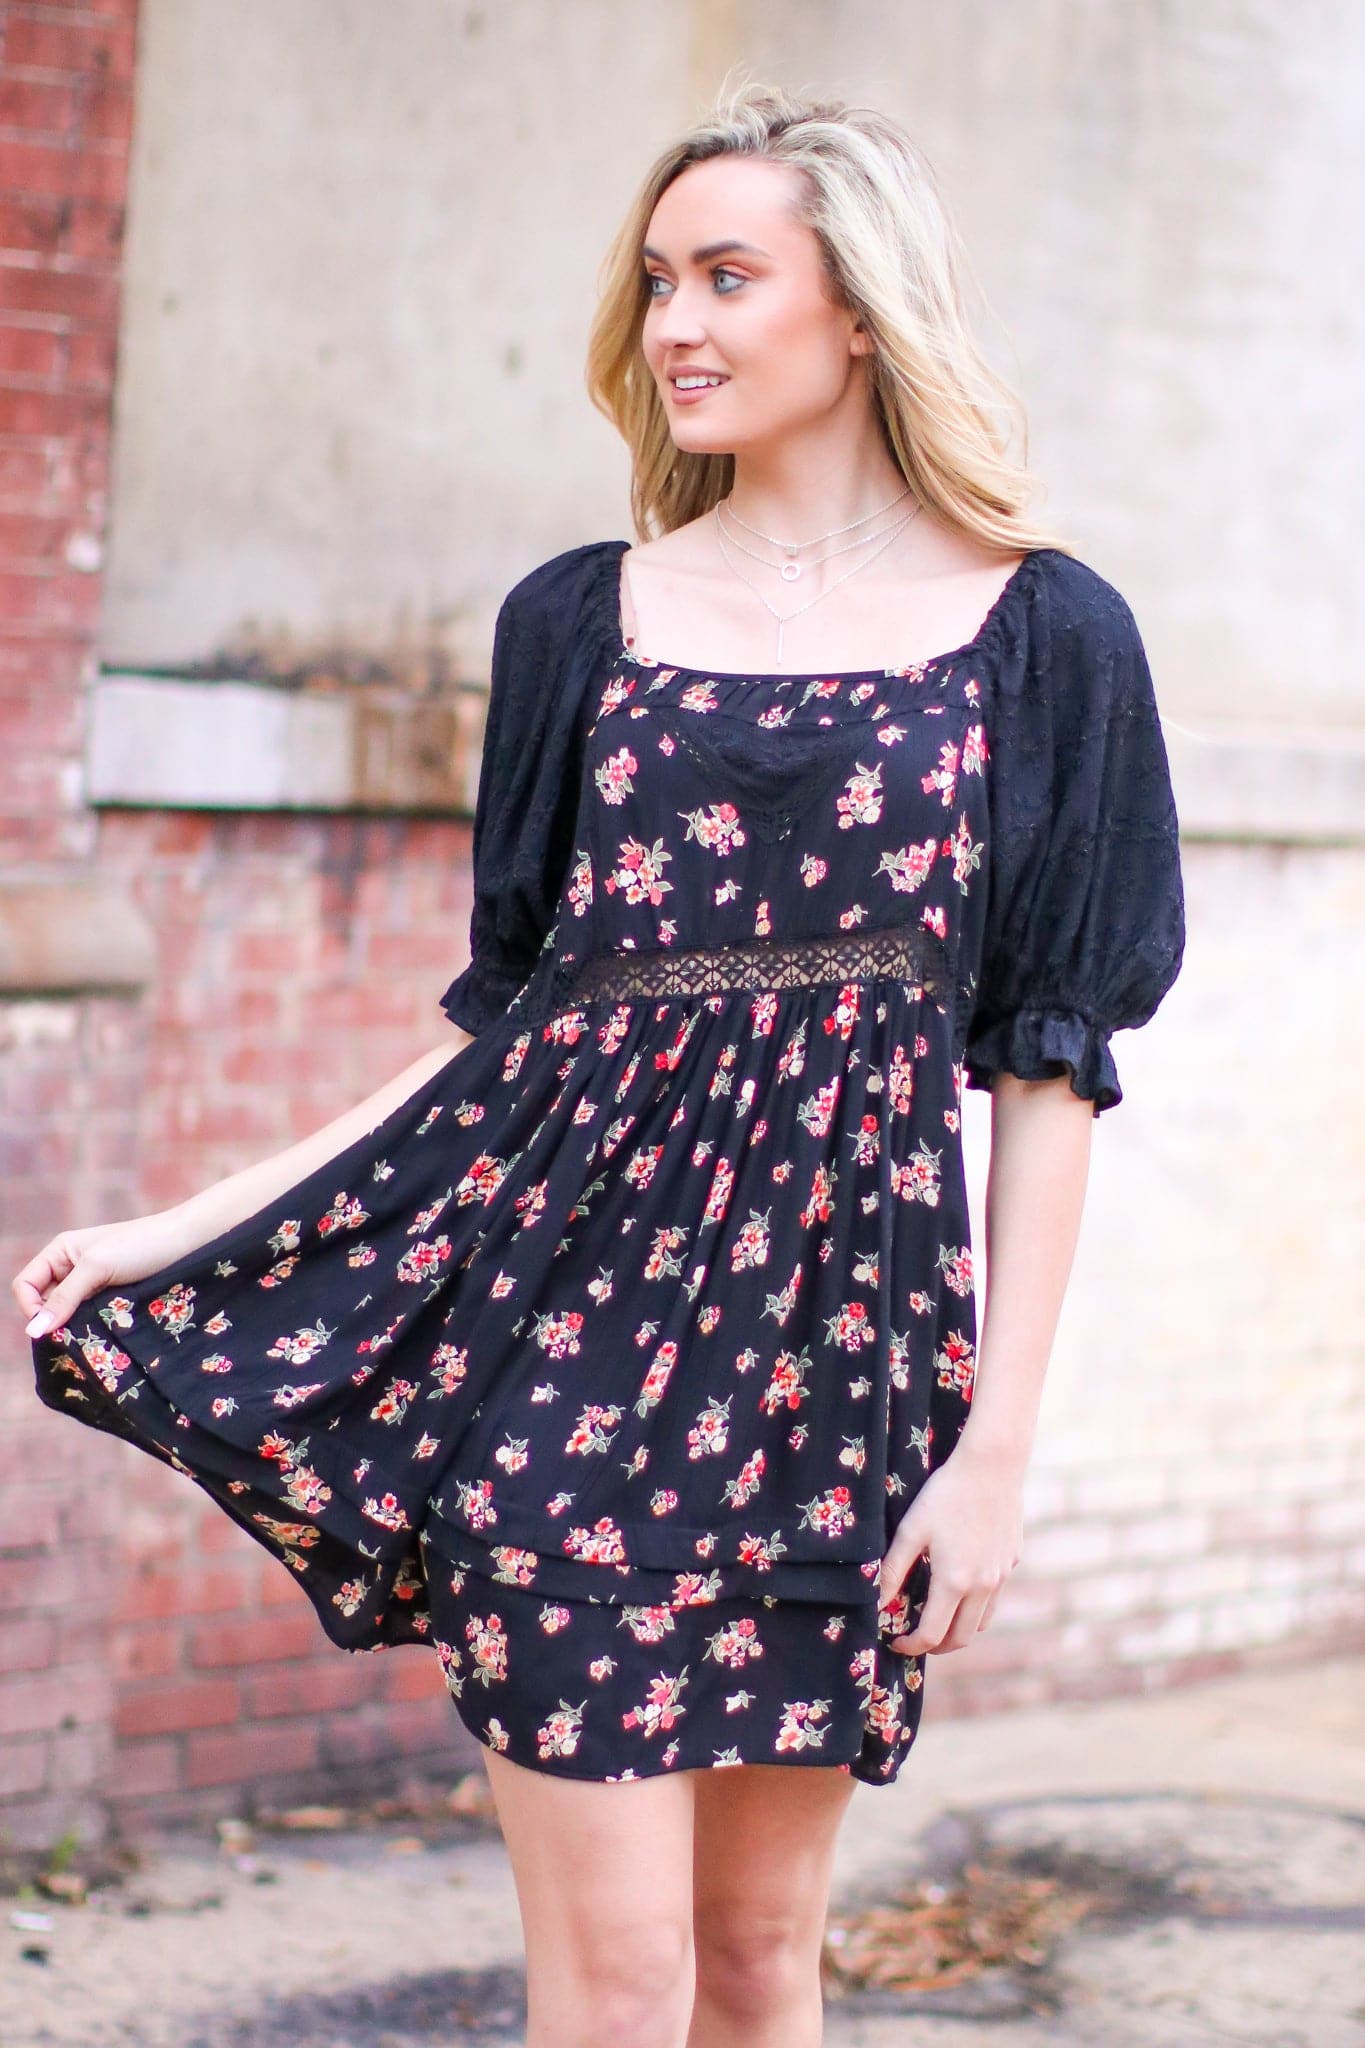  Praise Floral Embroidered Dress - FINAL SALE - Madison and Mallory